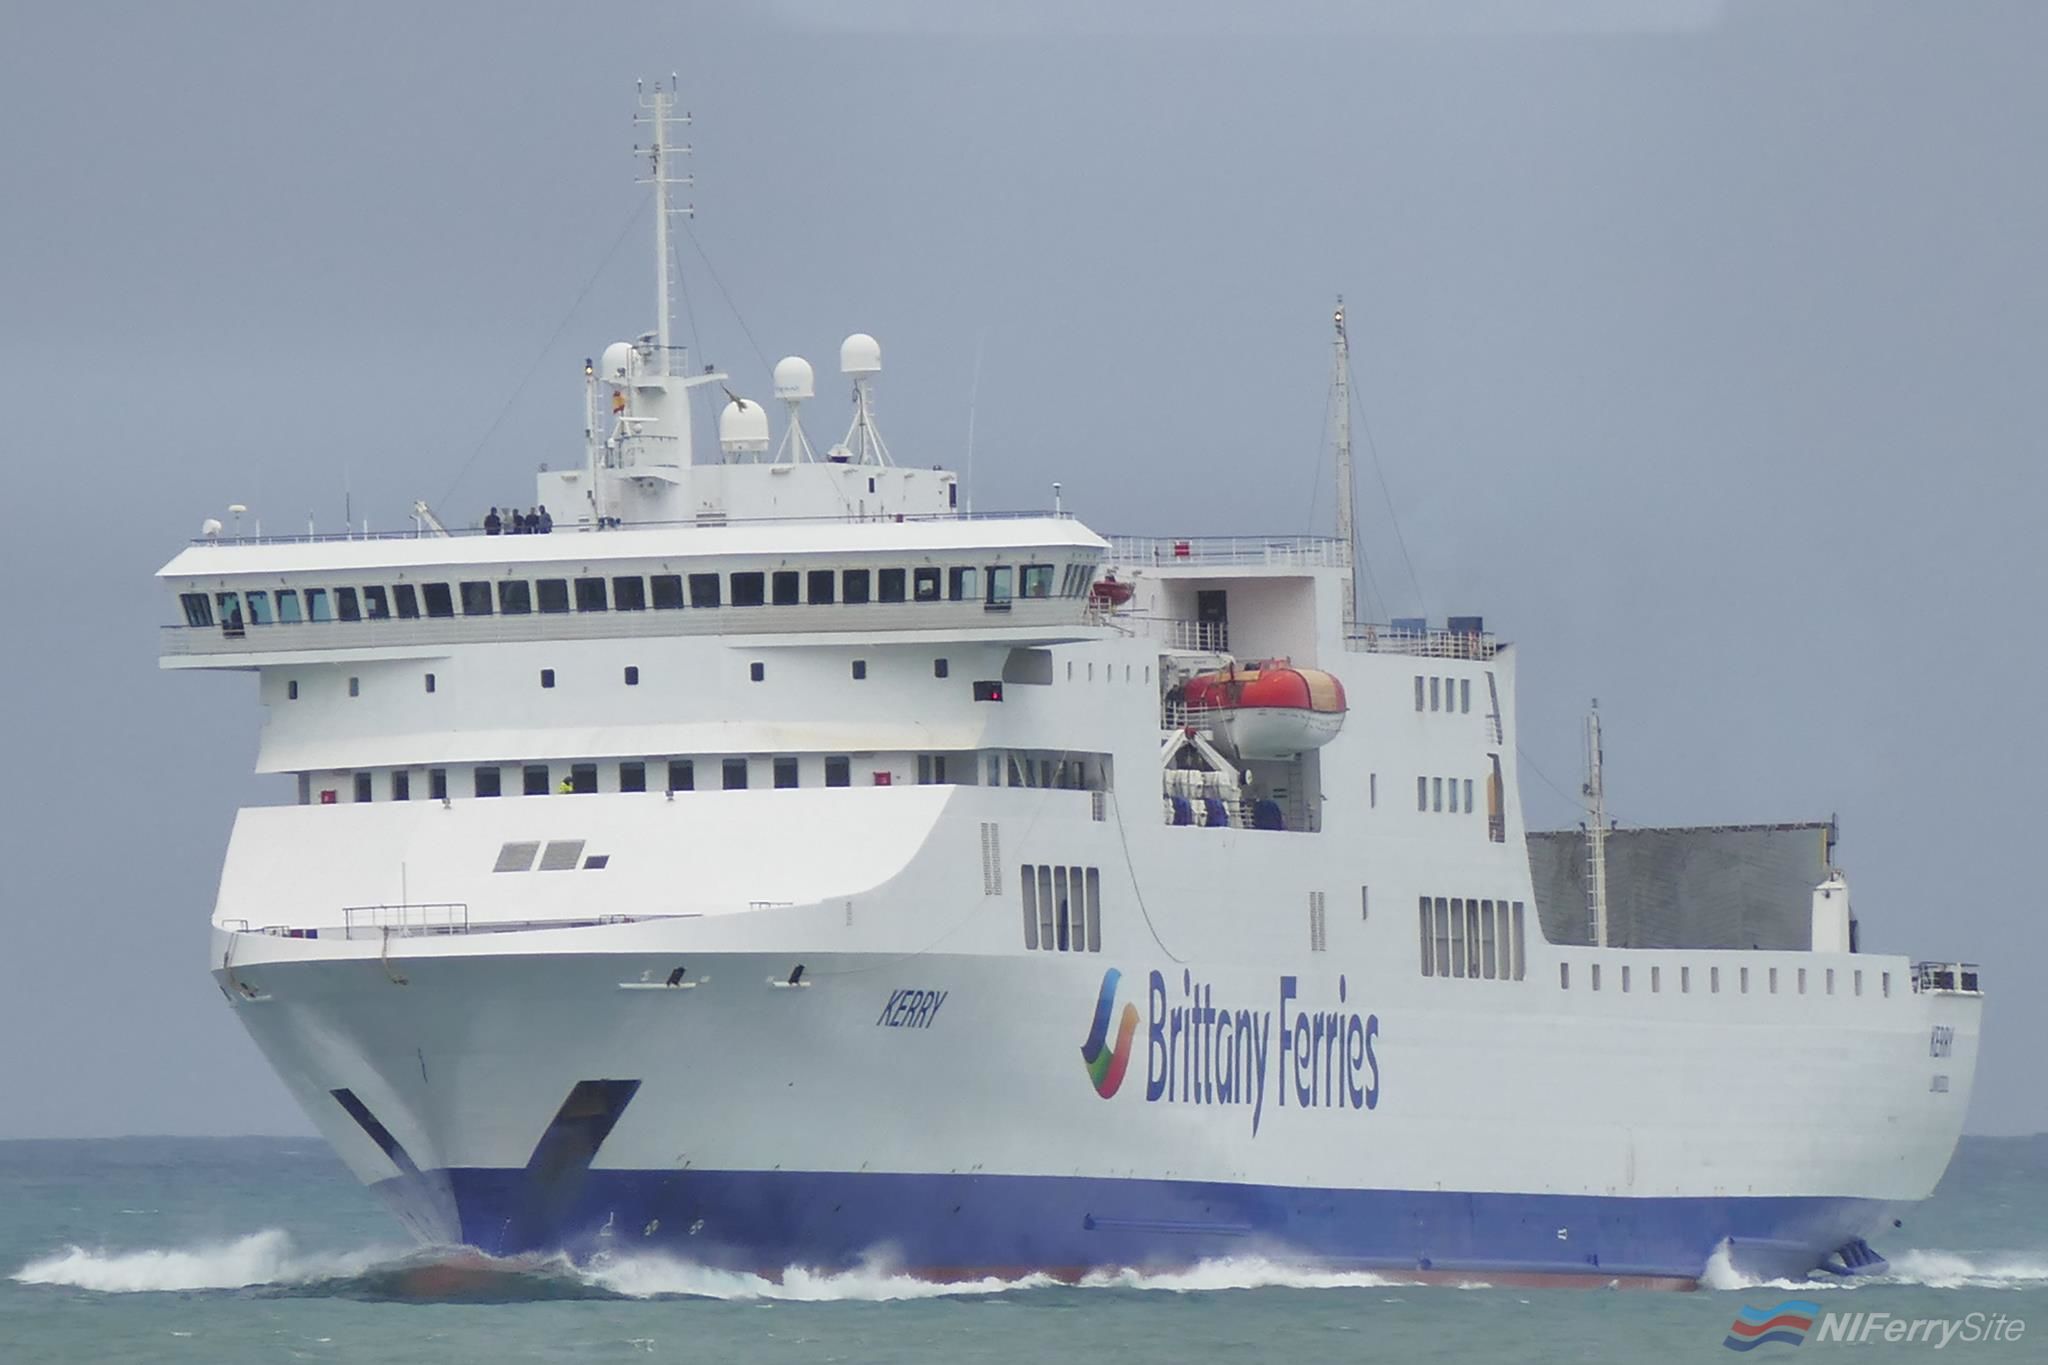 Brittany Ferries KERRY. Brittany Ferries / Jose Luis Diaz Campa.